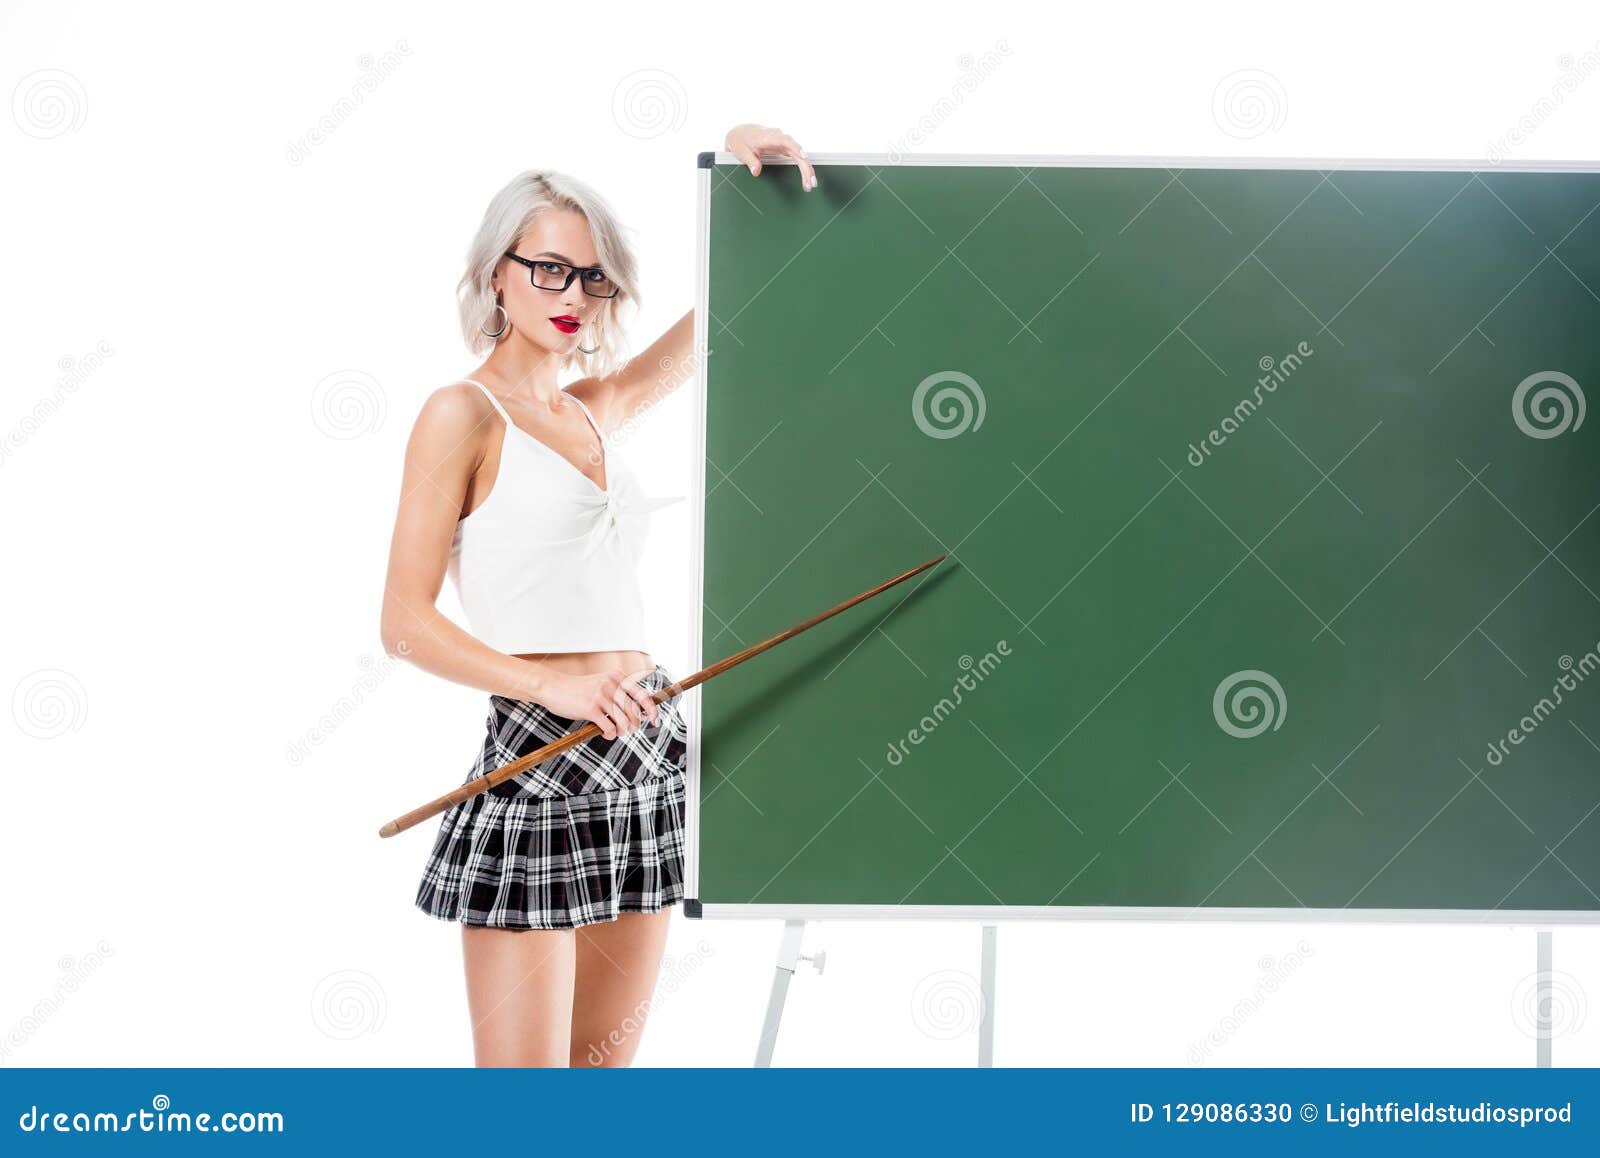 128 Sexy Asian Teacher Stock Photos, Images & Pictures